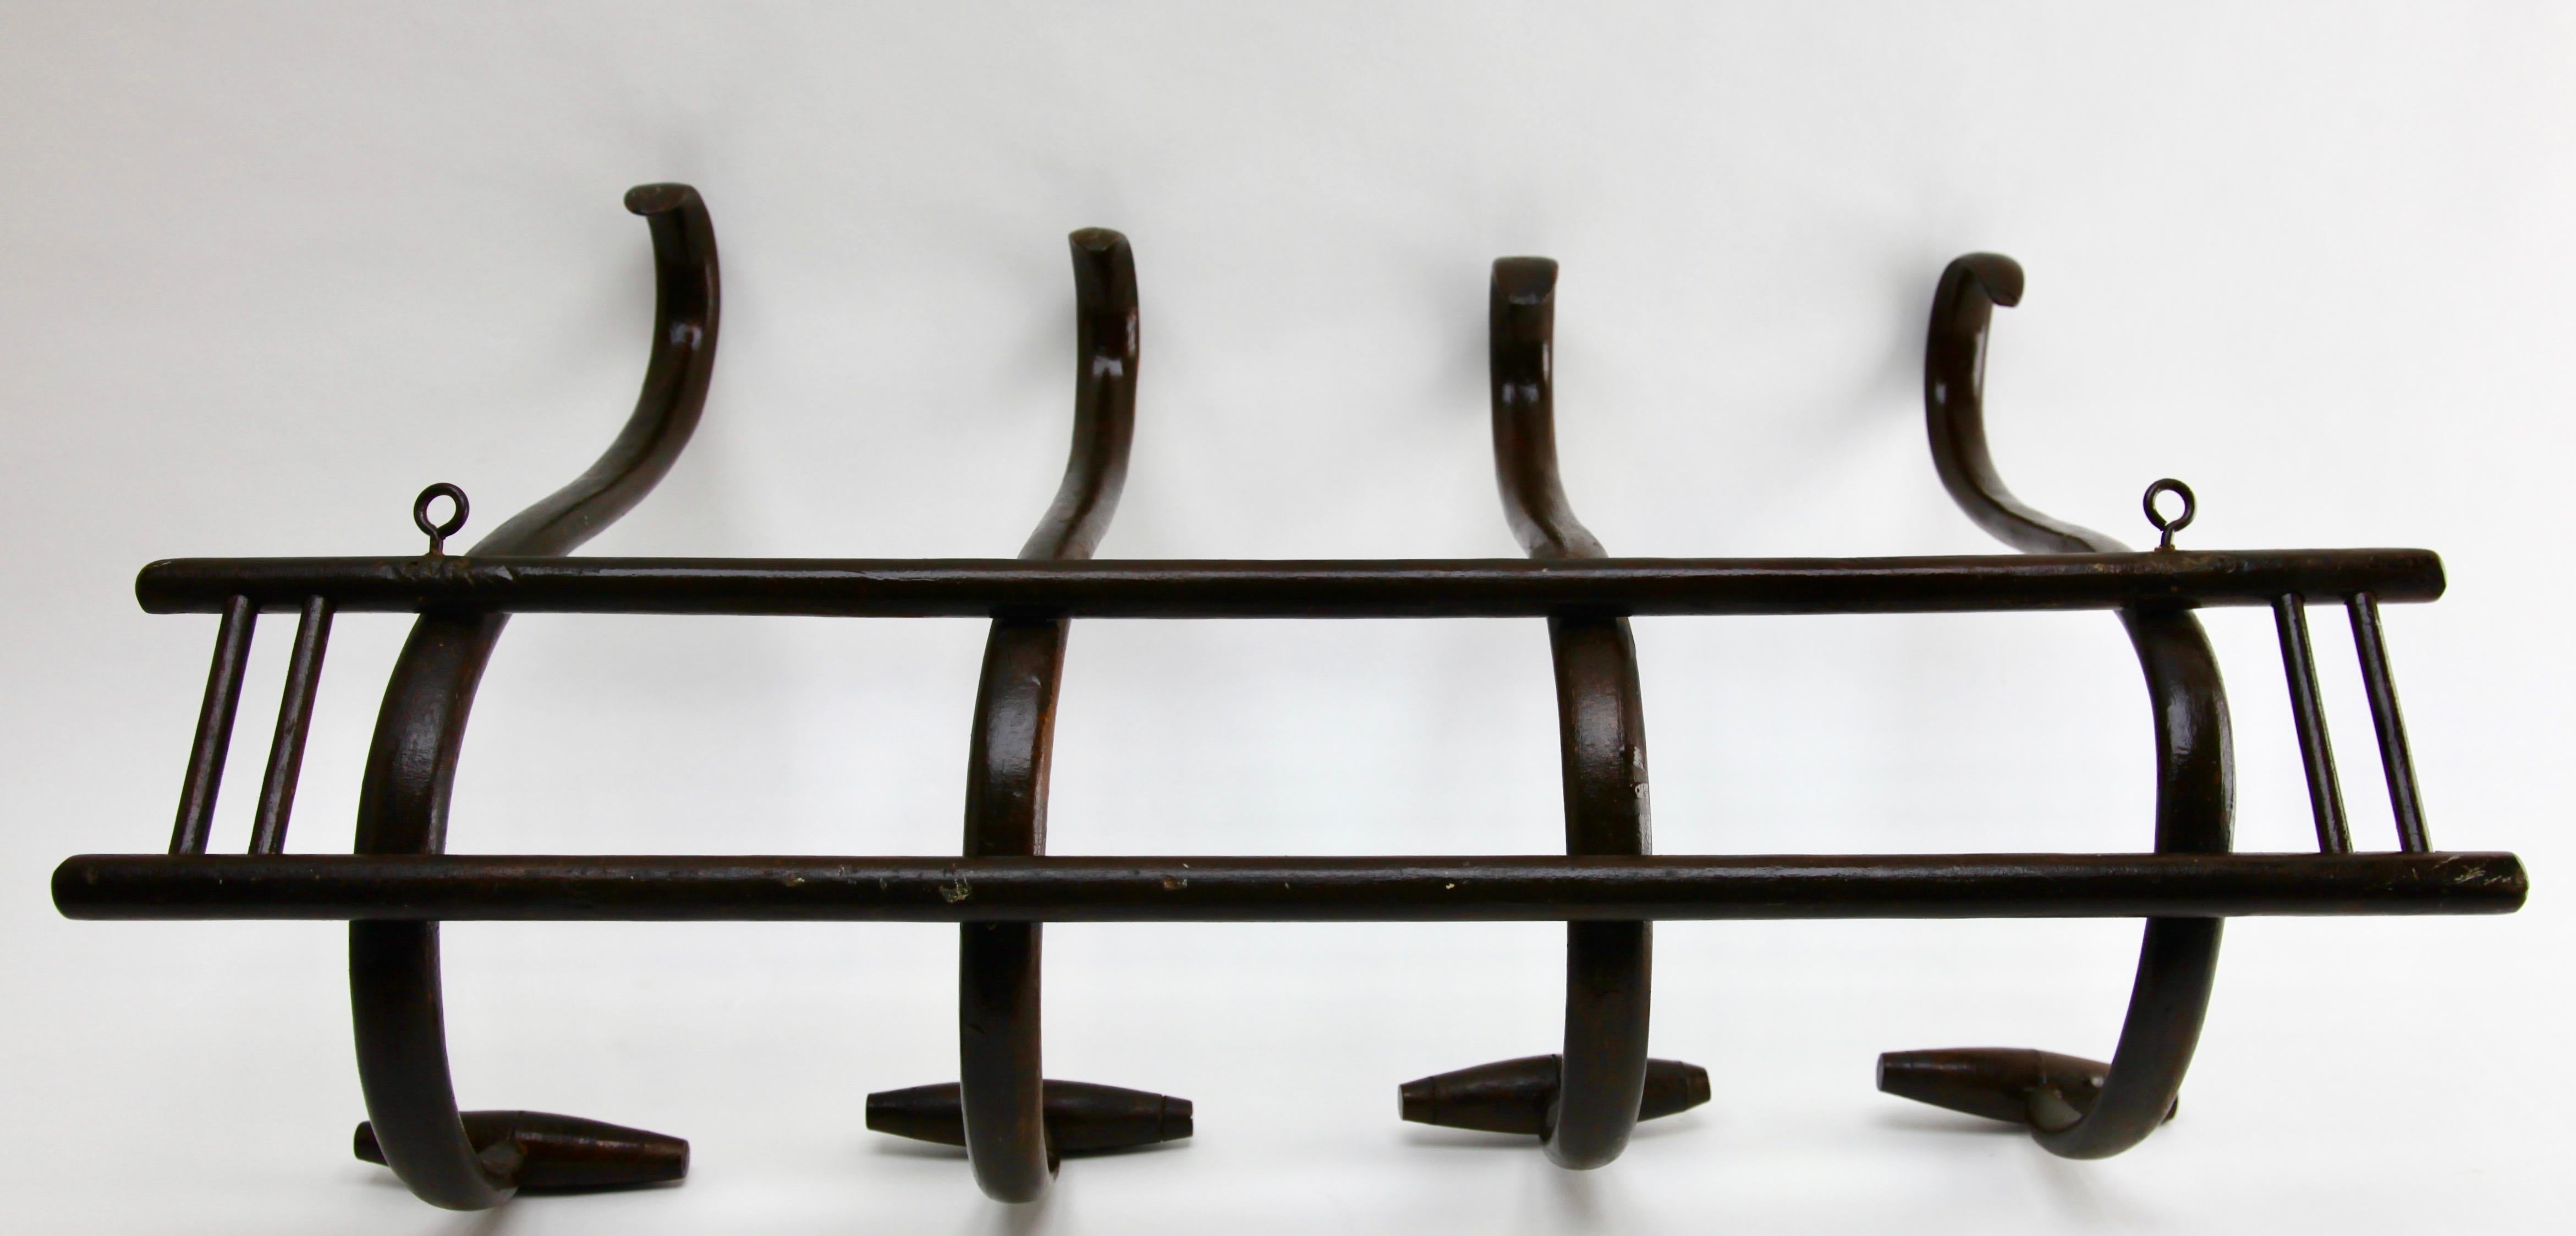 Hand-Crafted Art Nouveau Bentwood Wall Coat Rack Thonet, Vienna, 1879-1887